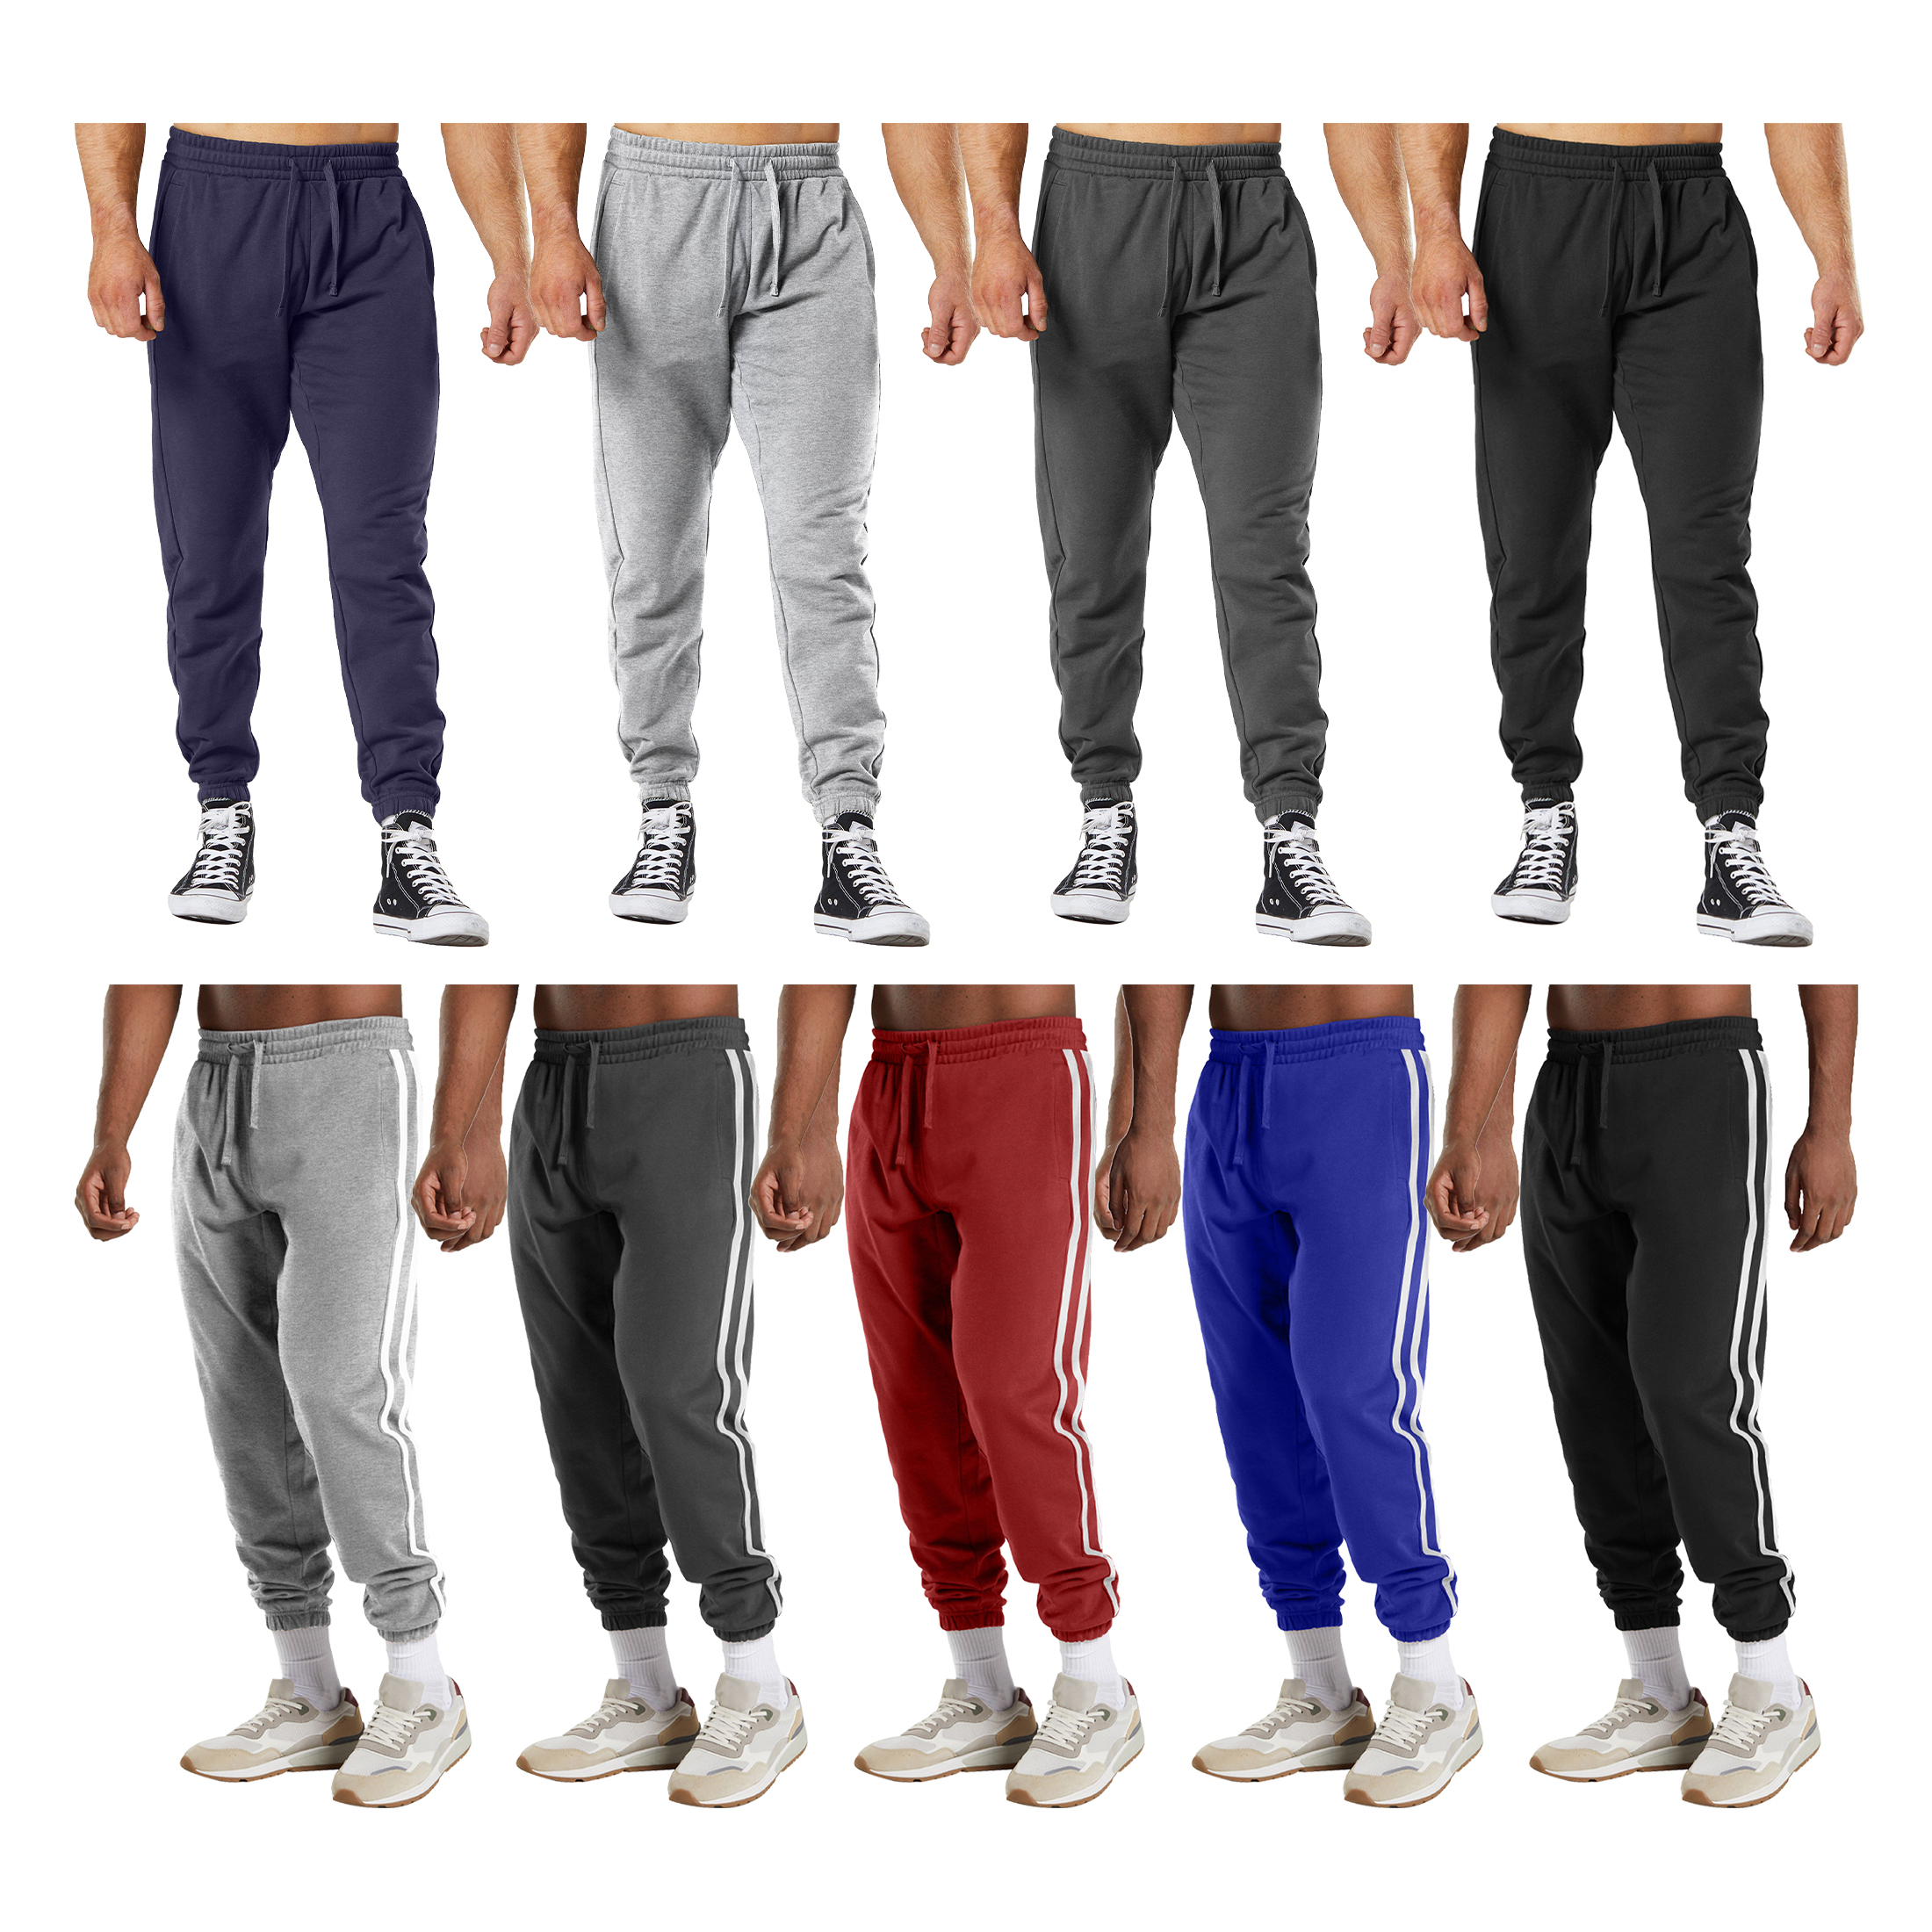 Multi-Pack: Men's Casual Fleece-Lined Elastic Bottom Jogger Pants With Pockets - 3-PACK, S